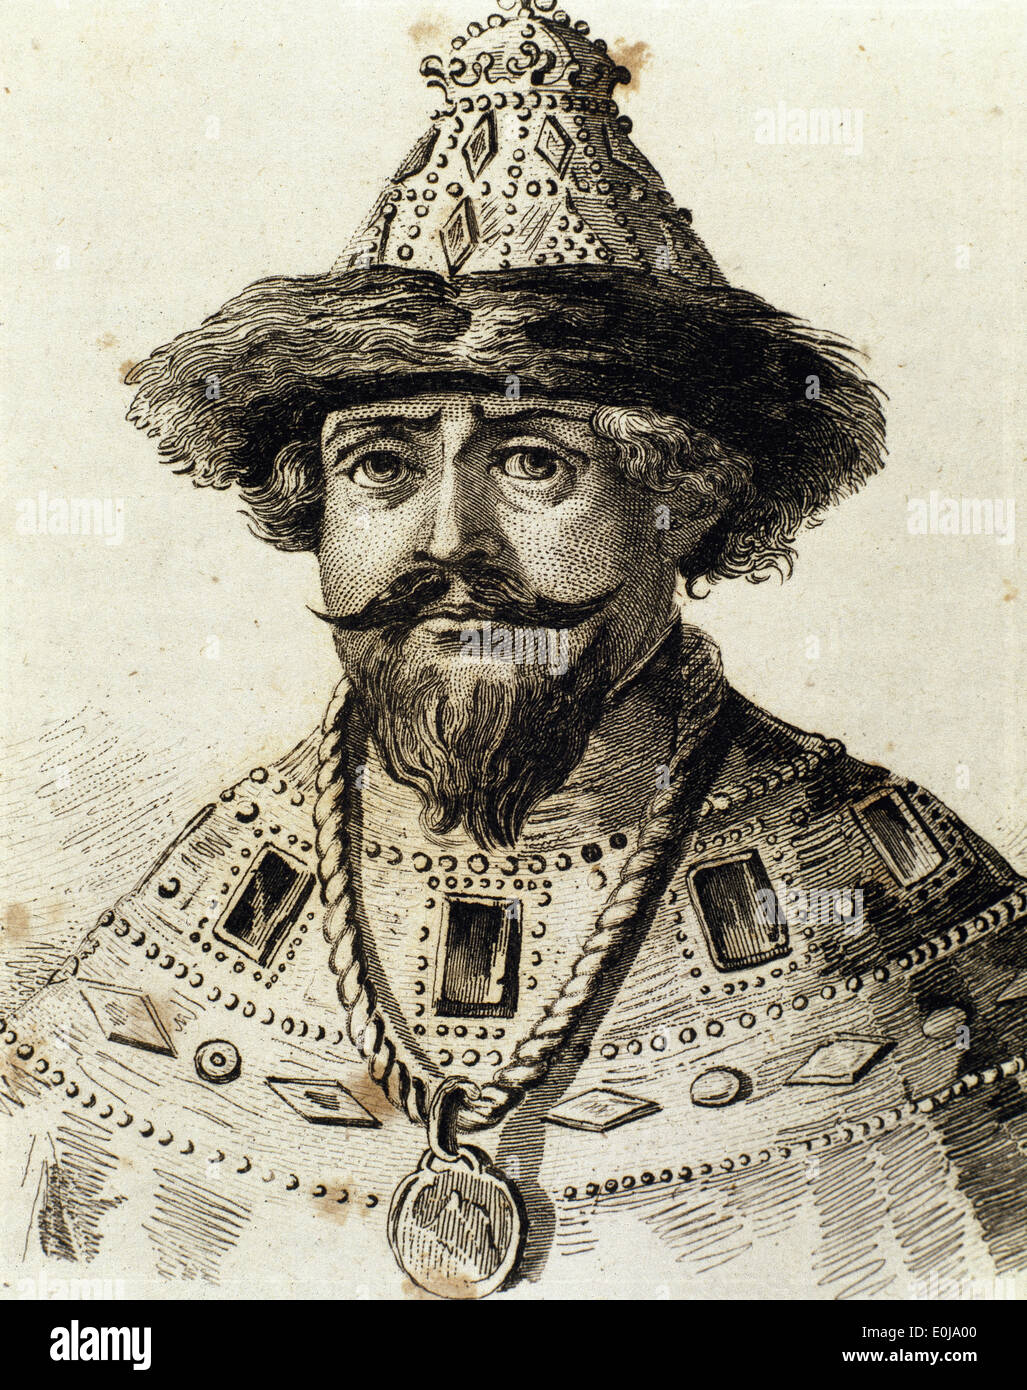 Michael I of Russia (1596-1645). First Russian Tsar of the house of Romanov. Engraving, 19th century. Stock Photo